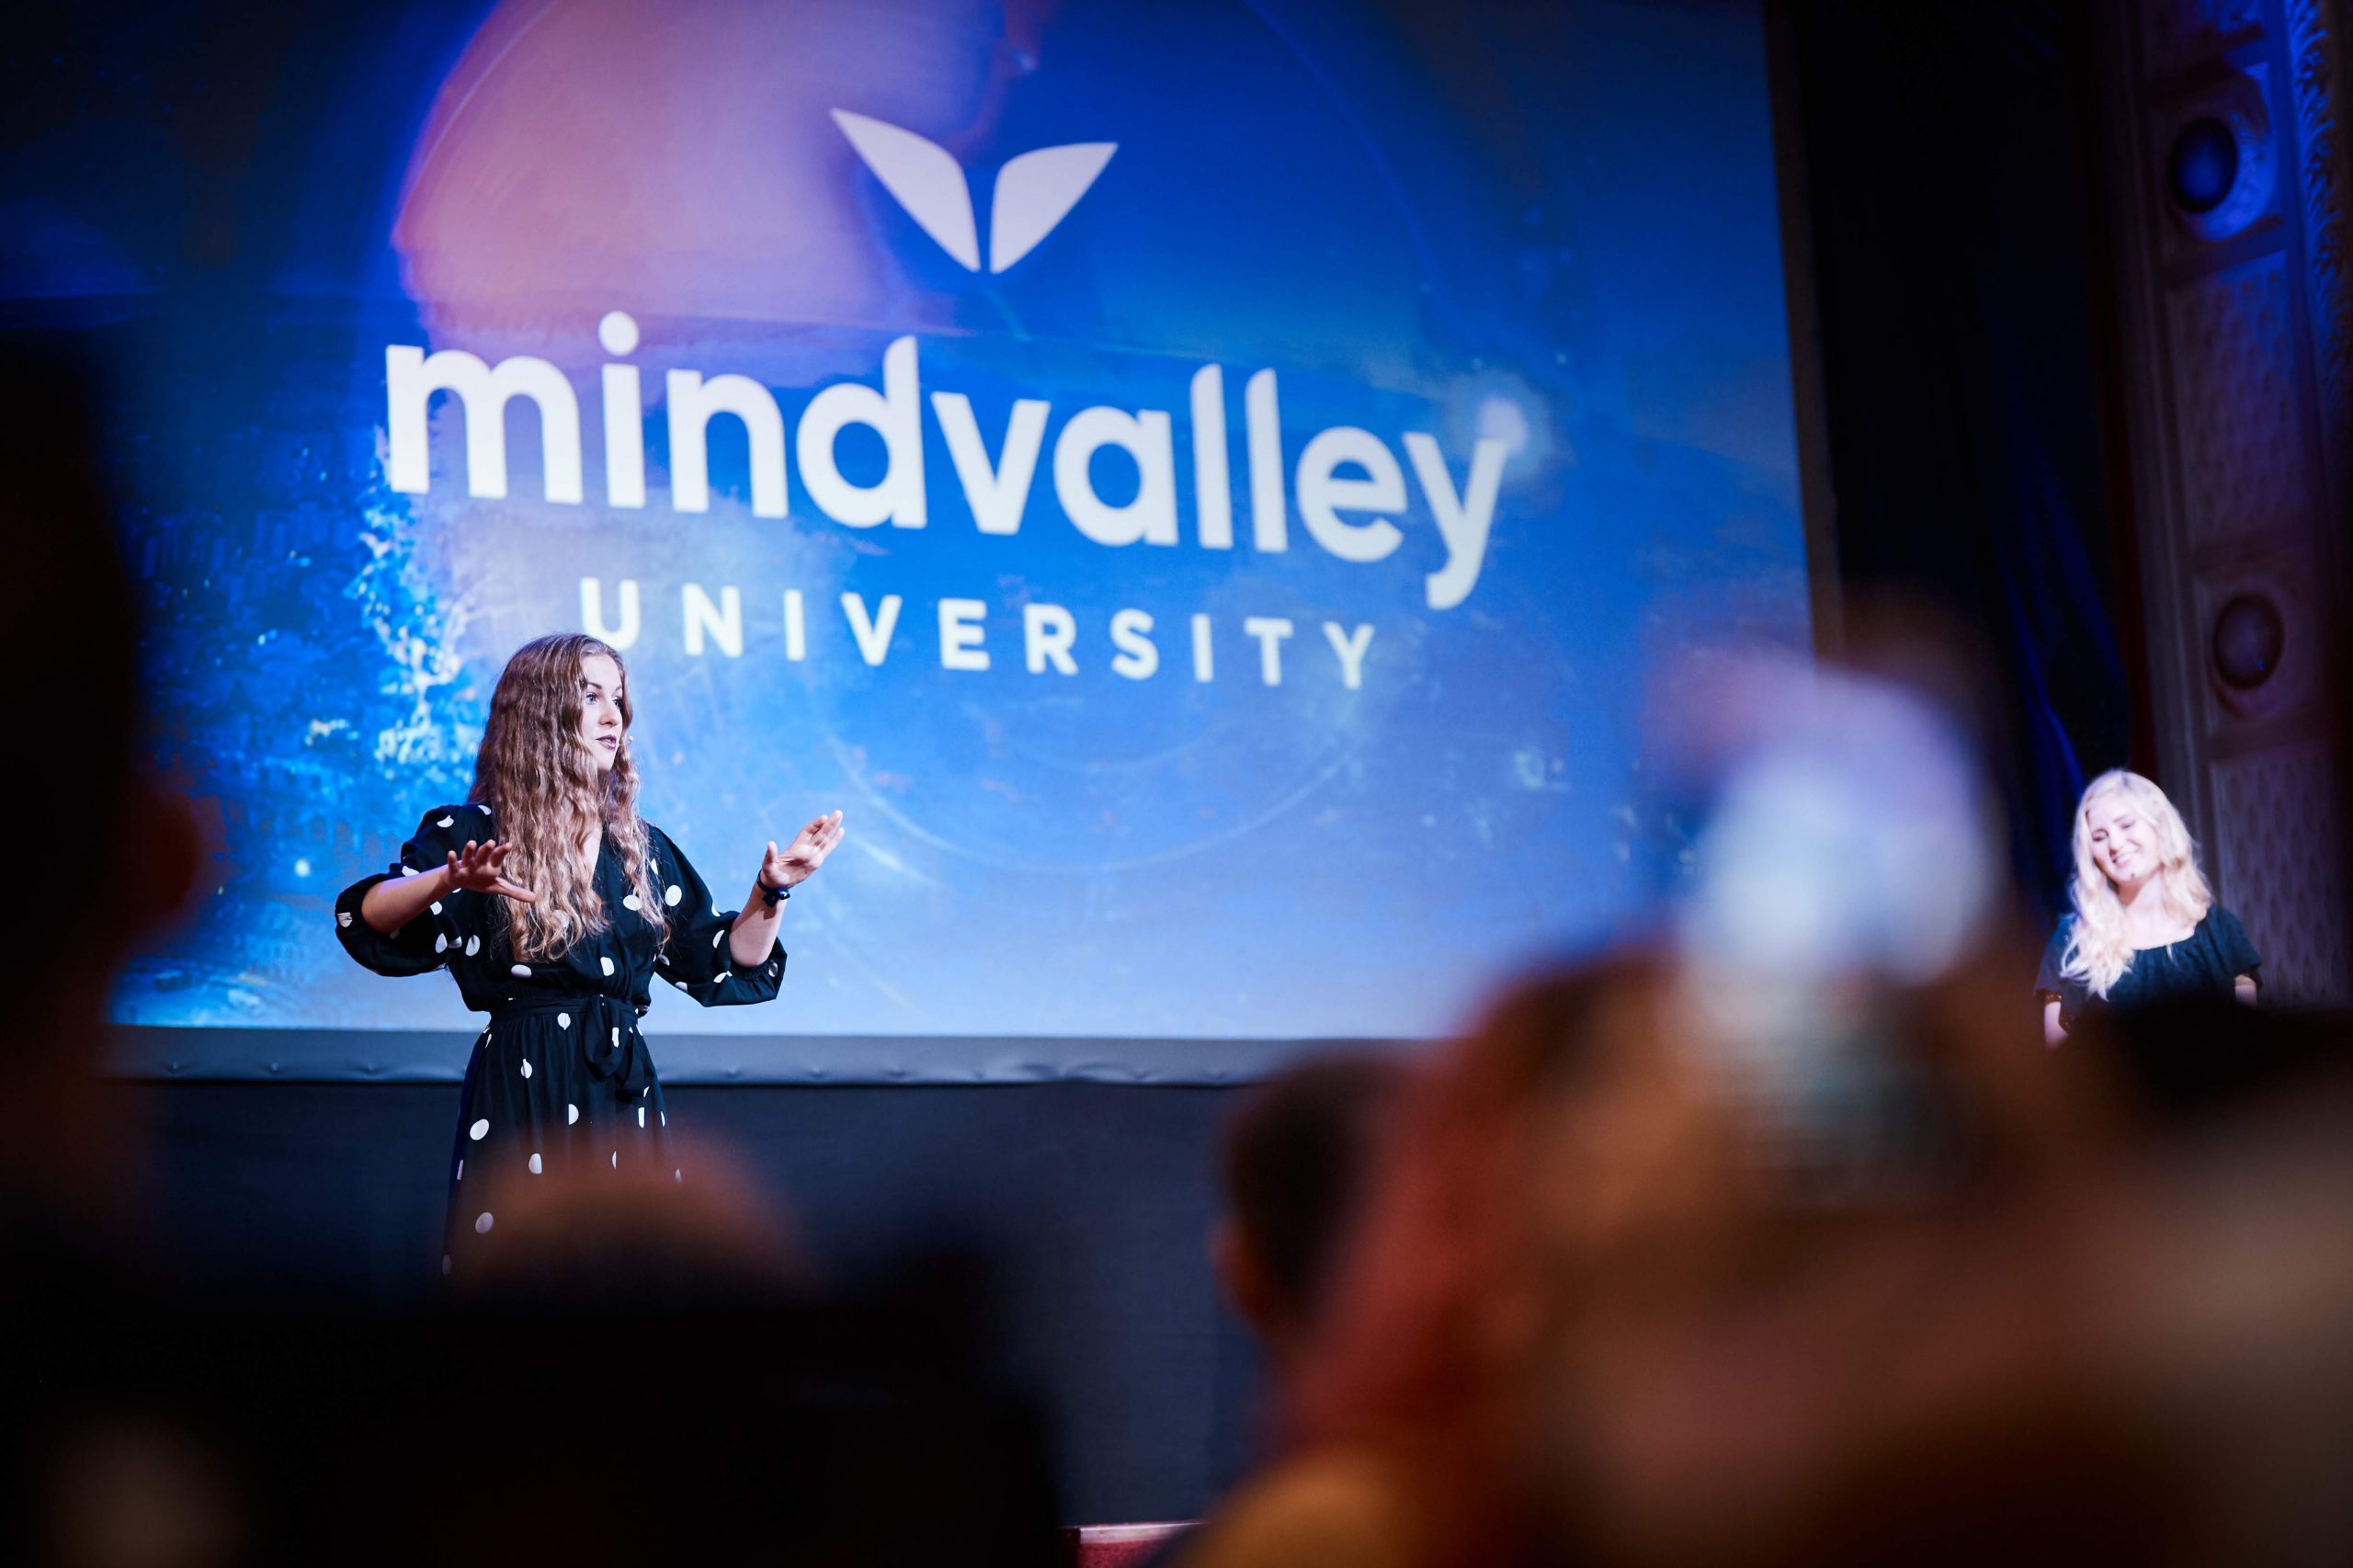 Kaitlin Murray of Odyssey HQ speaking on stage with the MindValley University logo behind her | Wanderful